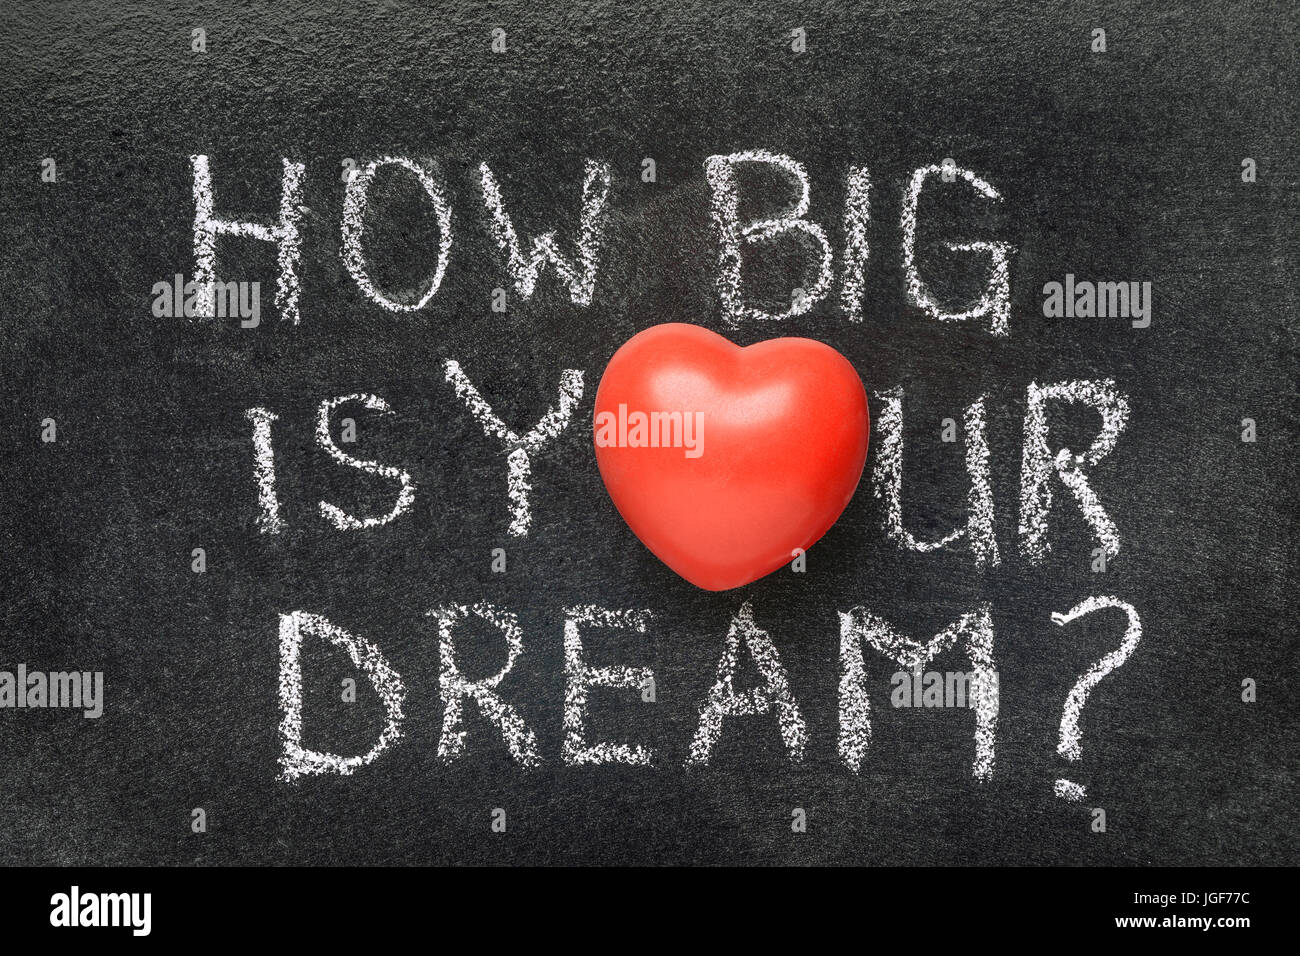 how big is your dream question handwritten on blackboard with heart symbol instead of O Stock Photo